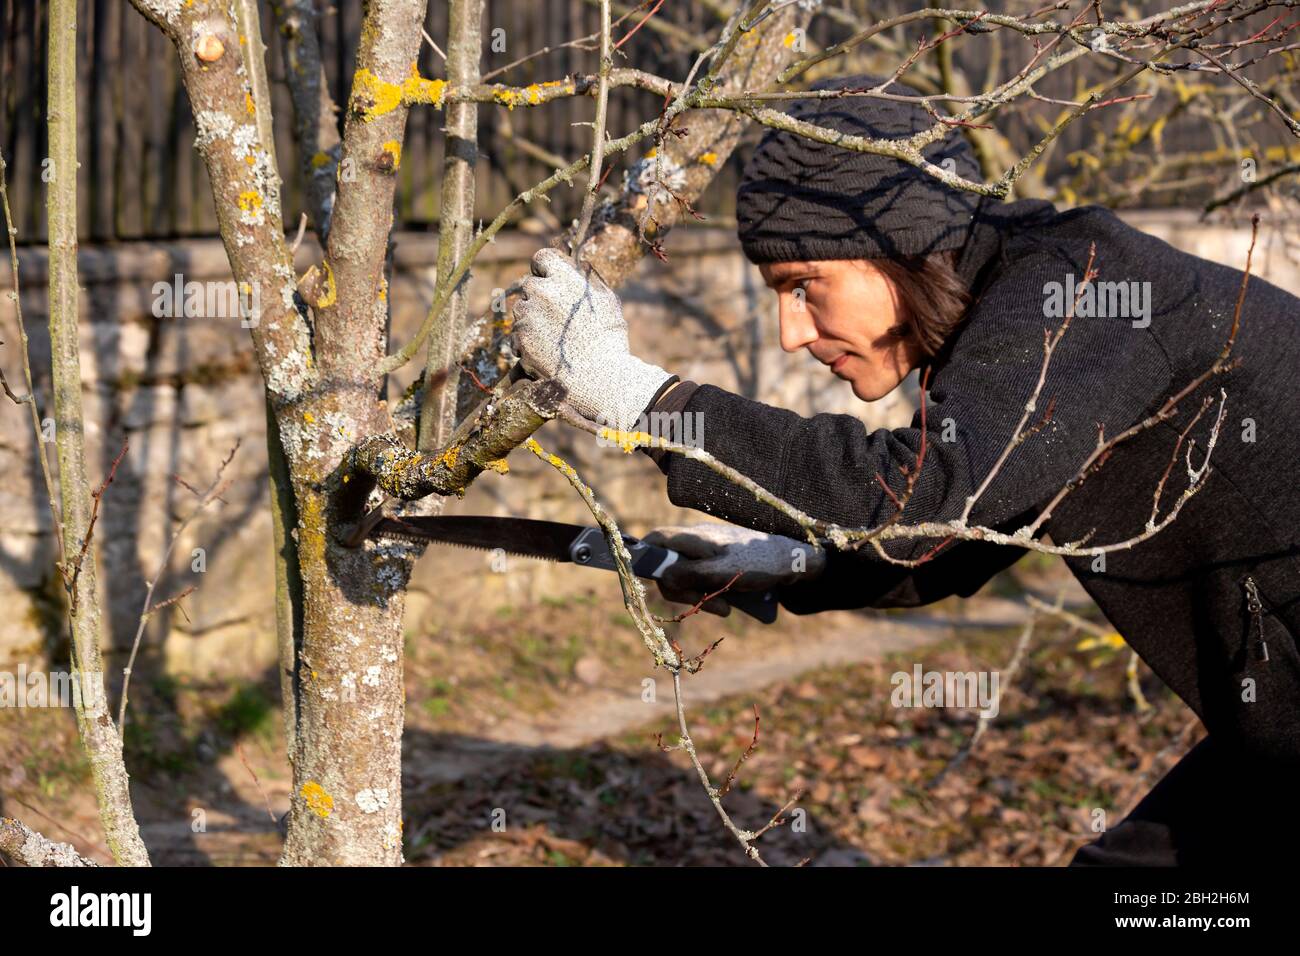 Pruning of tree with handsaw Stock Photo